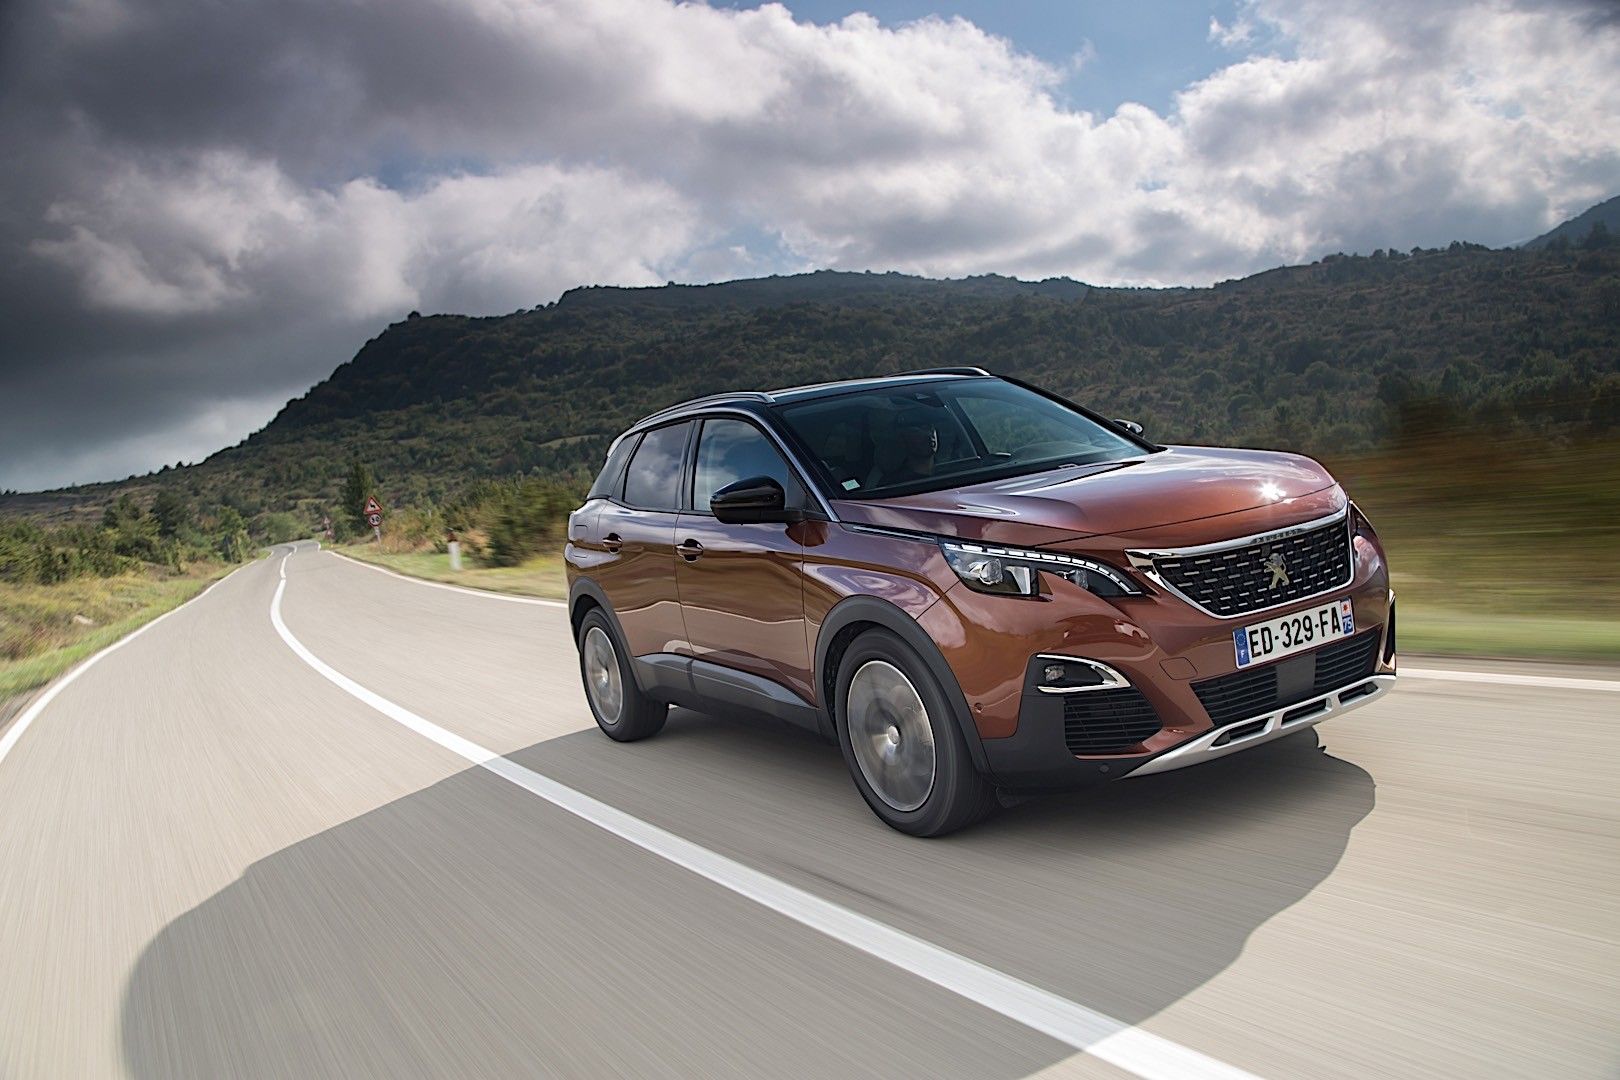 Peugeot 3008 SUV. The second generation. Released since 2016